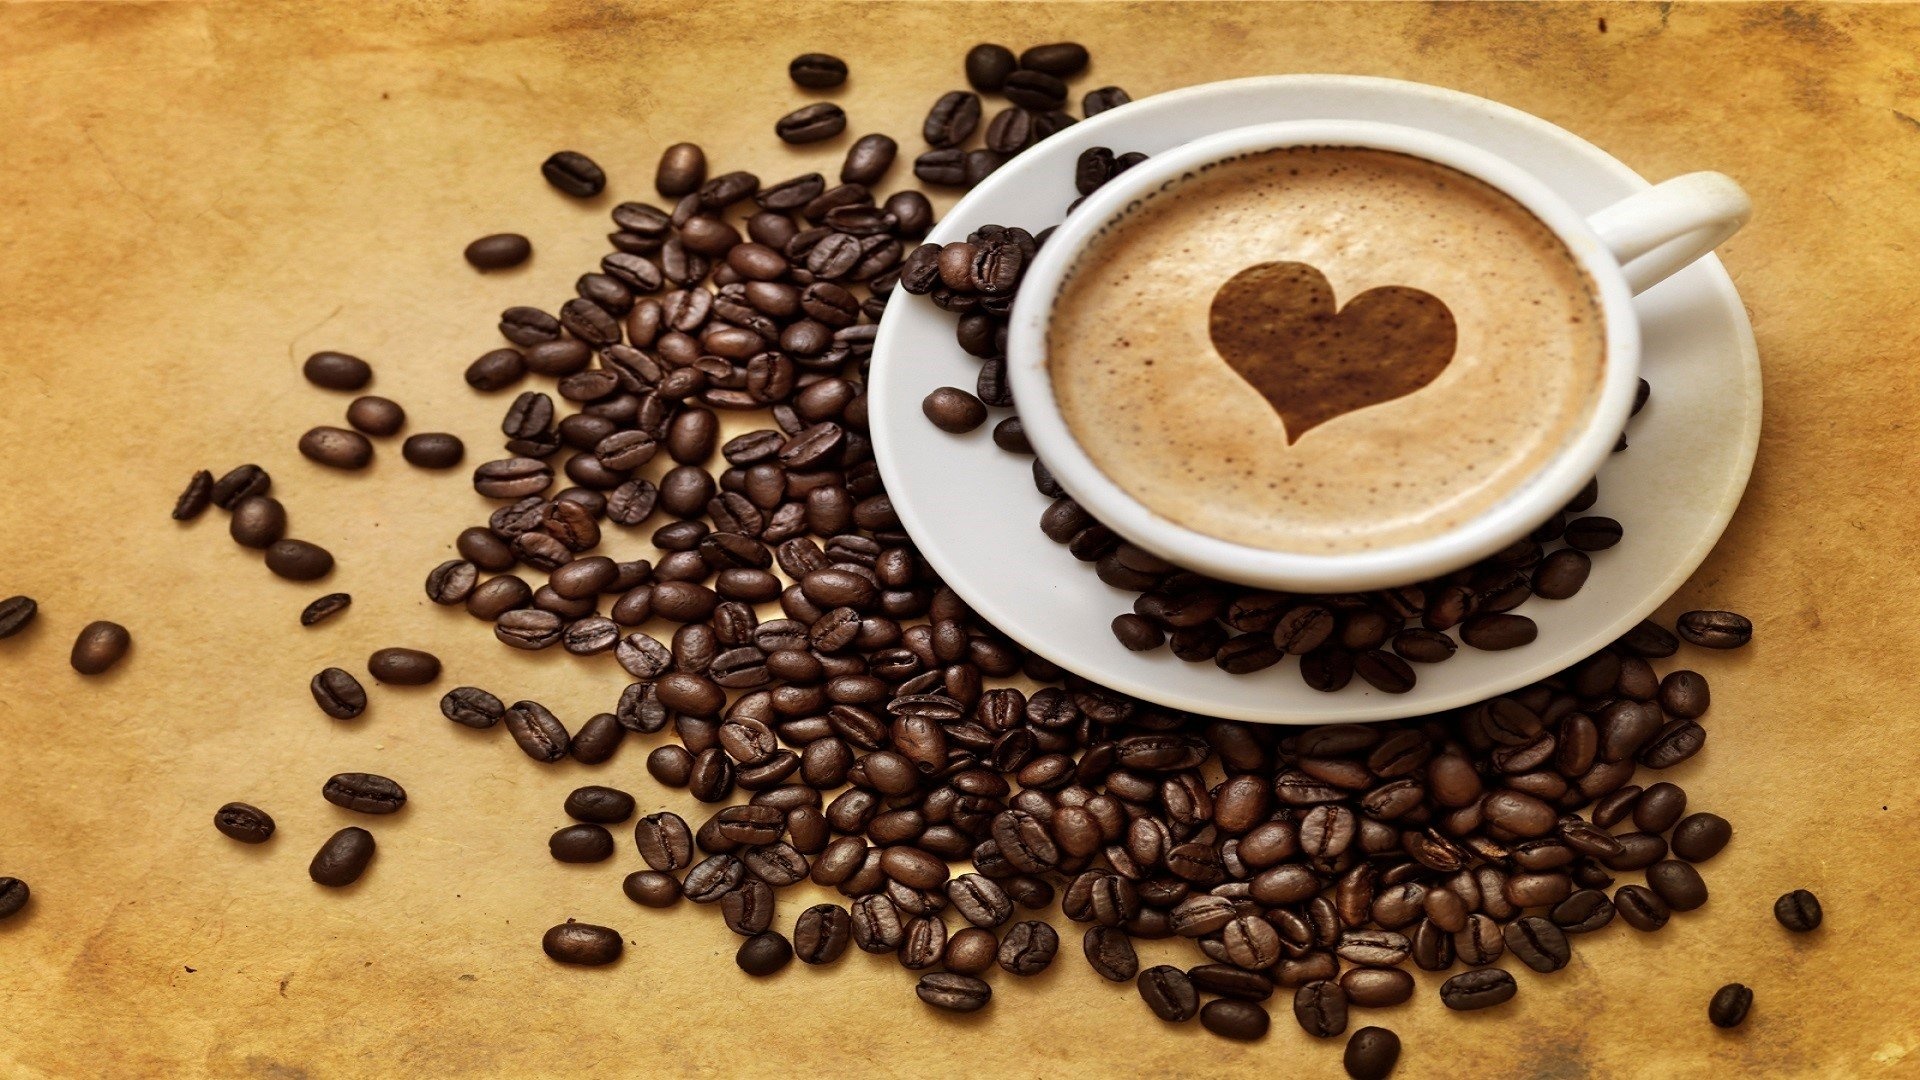 Coffee: Latte art, Design on the surface of the latte, Breakfast. 1920x1080 Full HD Background.